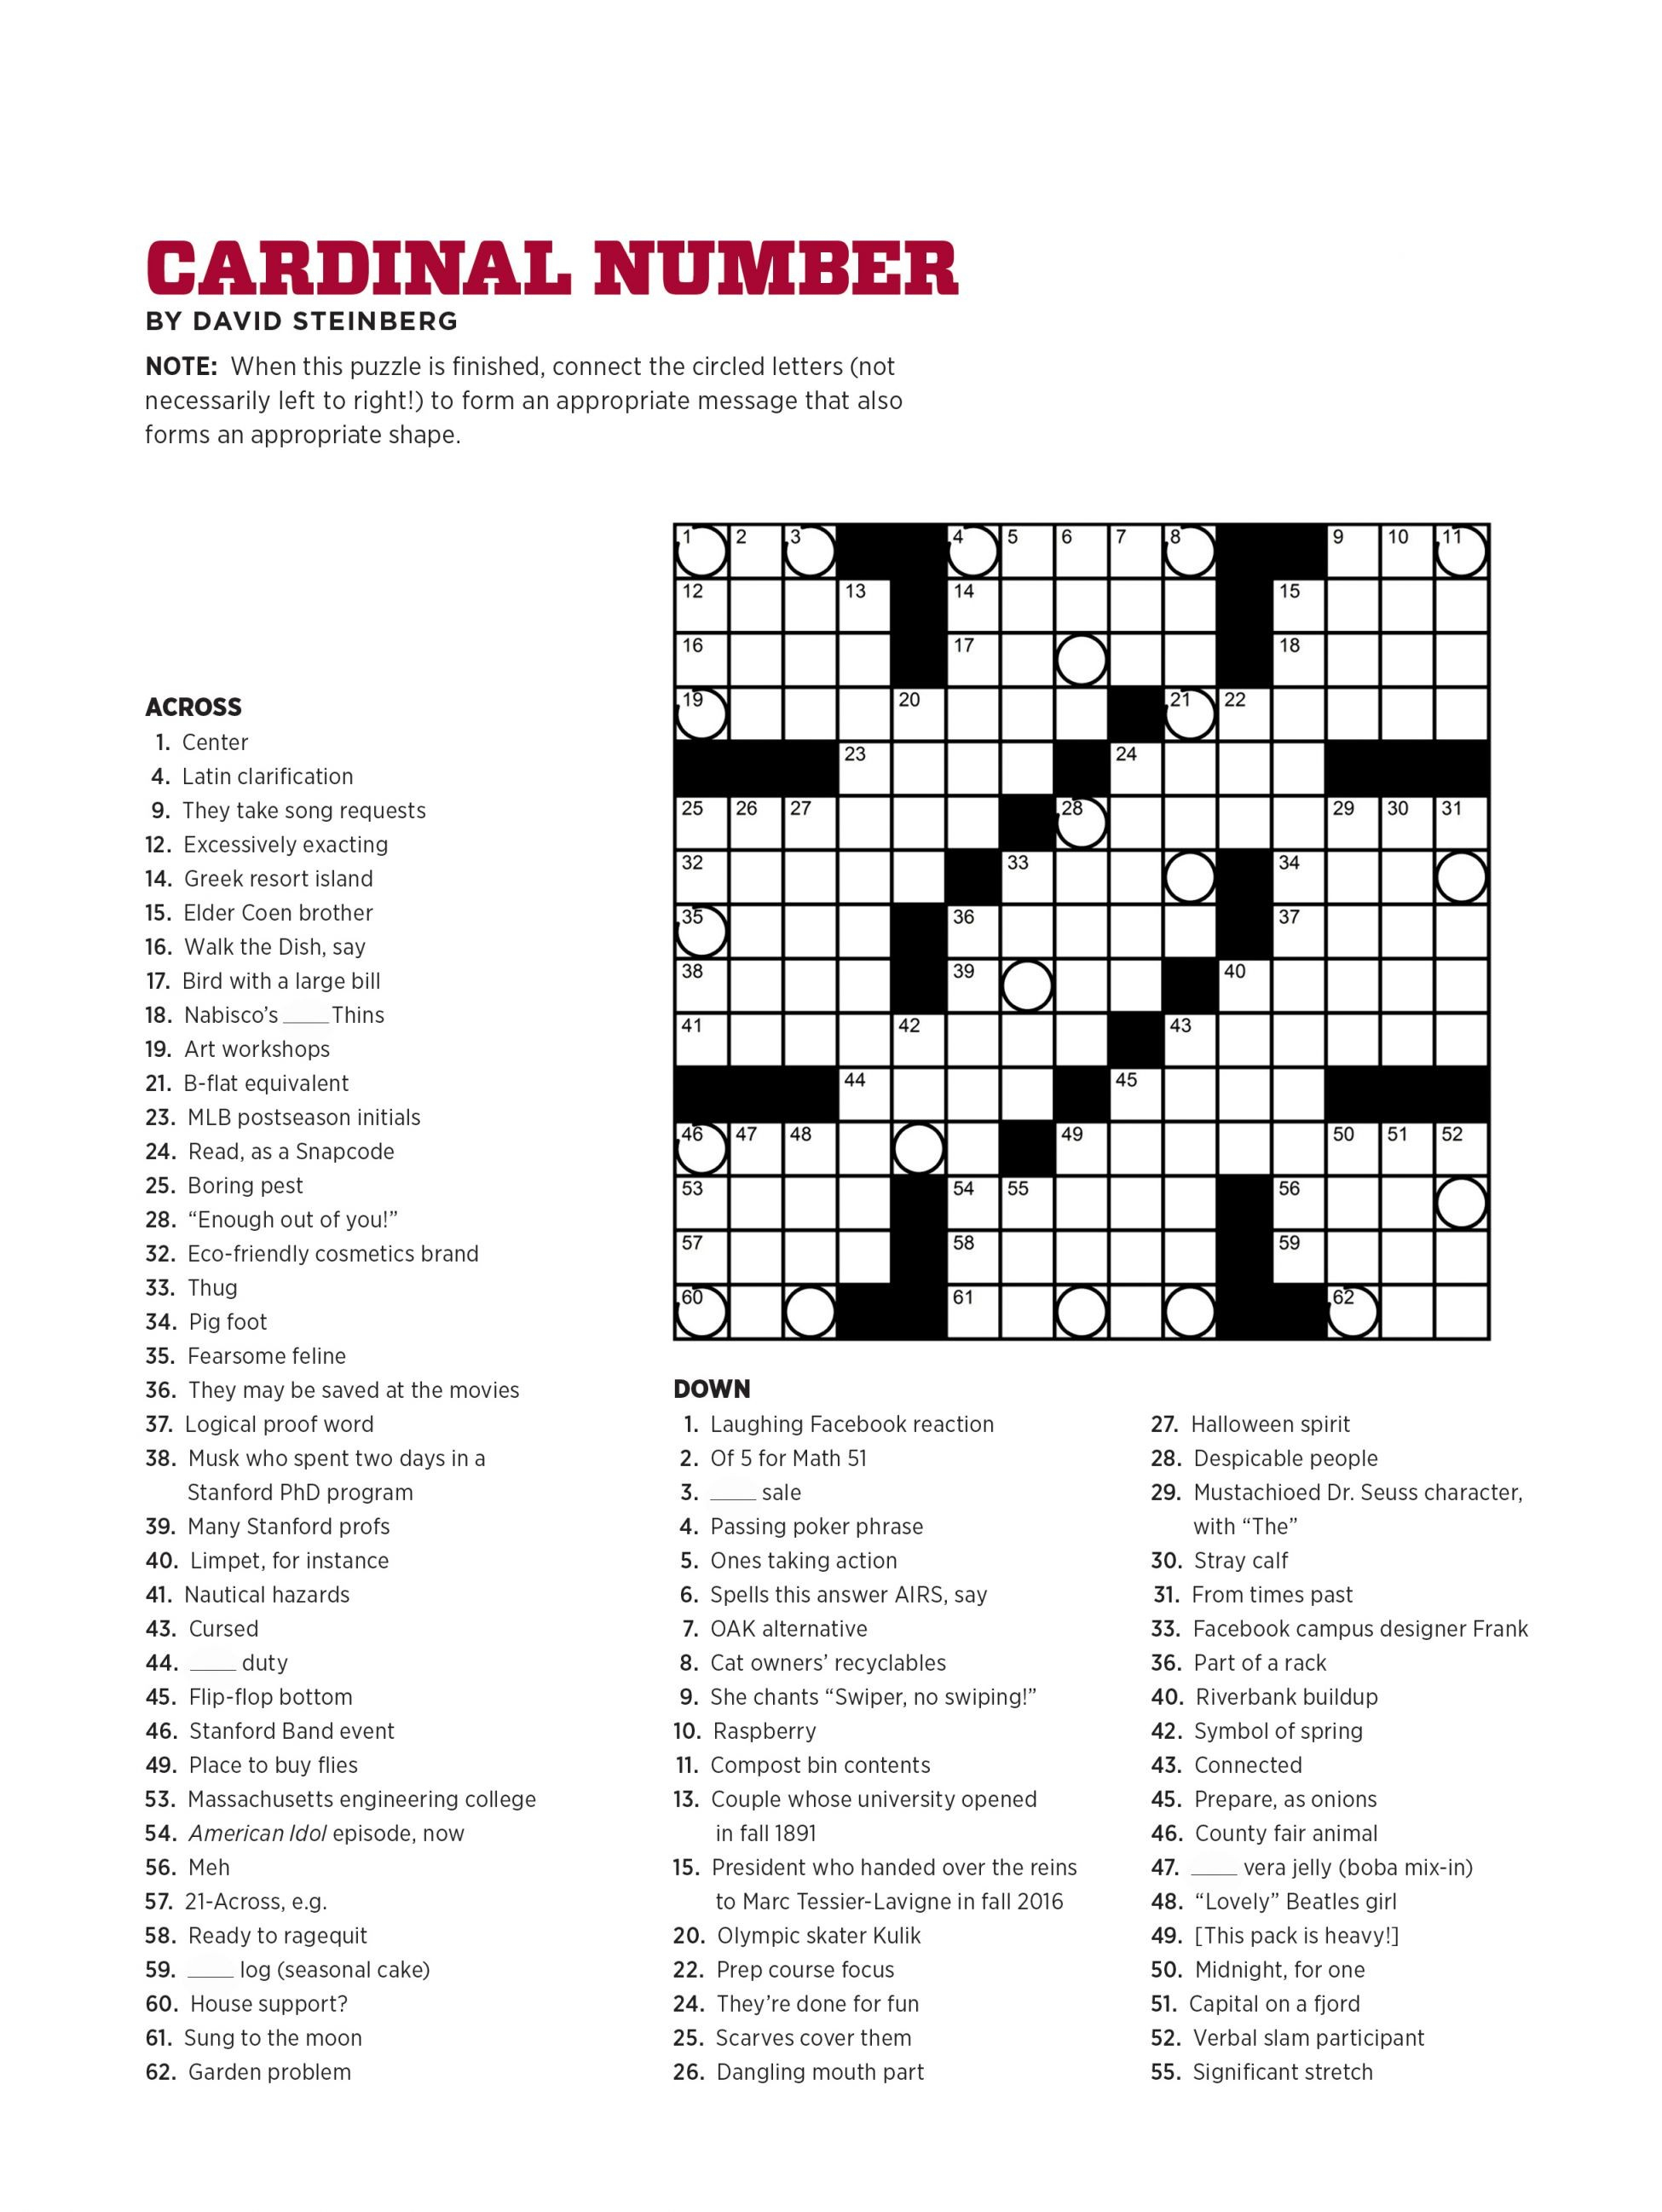 usa today free daily crossword puzzles